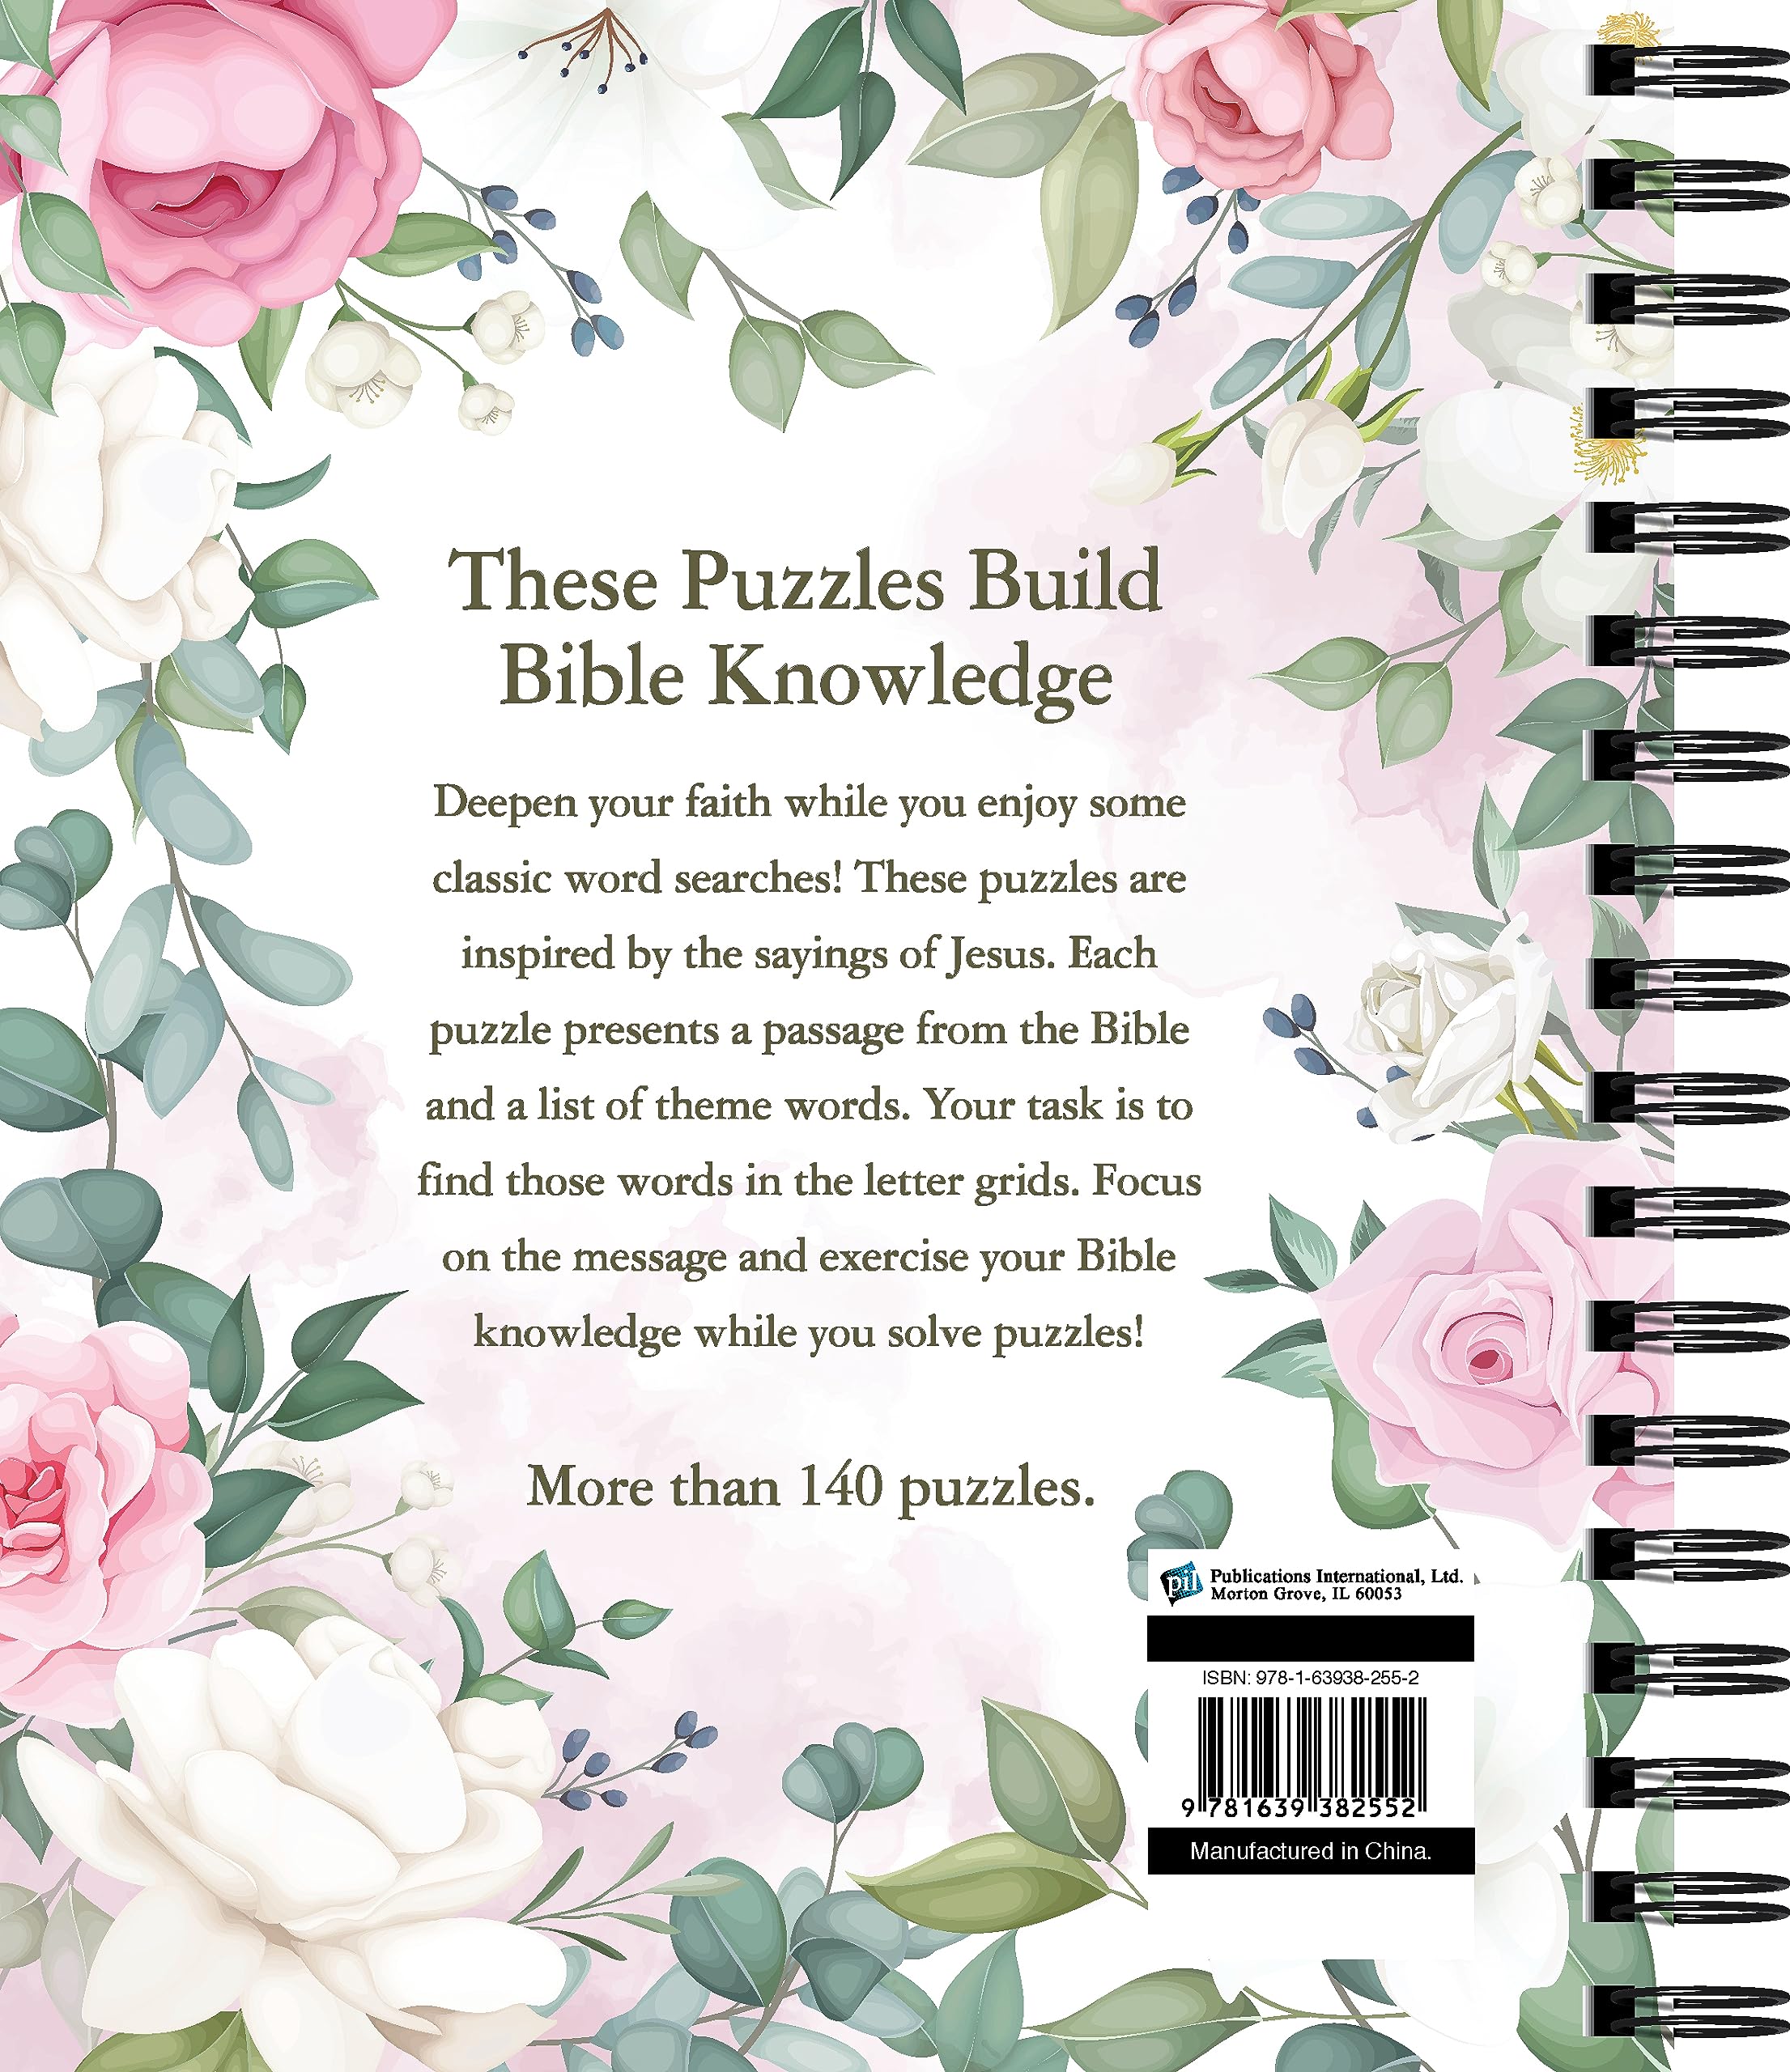 Brain Games - Words of Jesus Word Search Puzzles (320 Pages) (Brain Games - Bible)